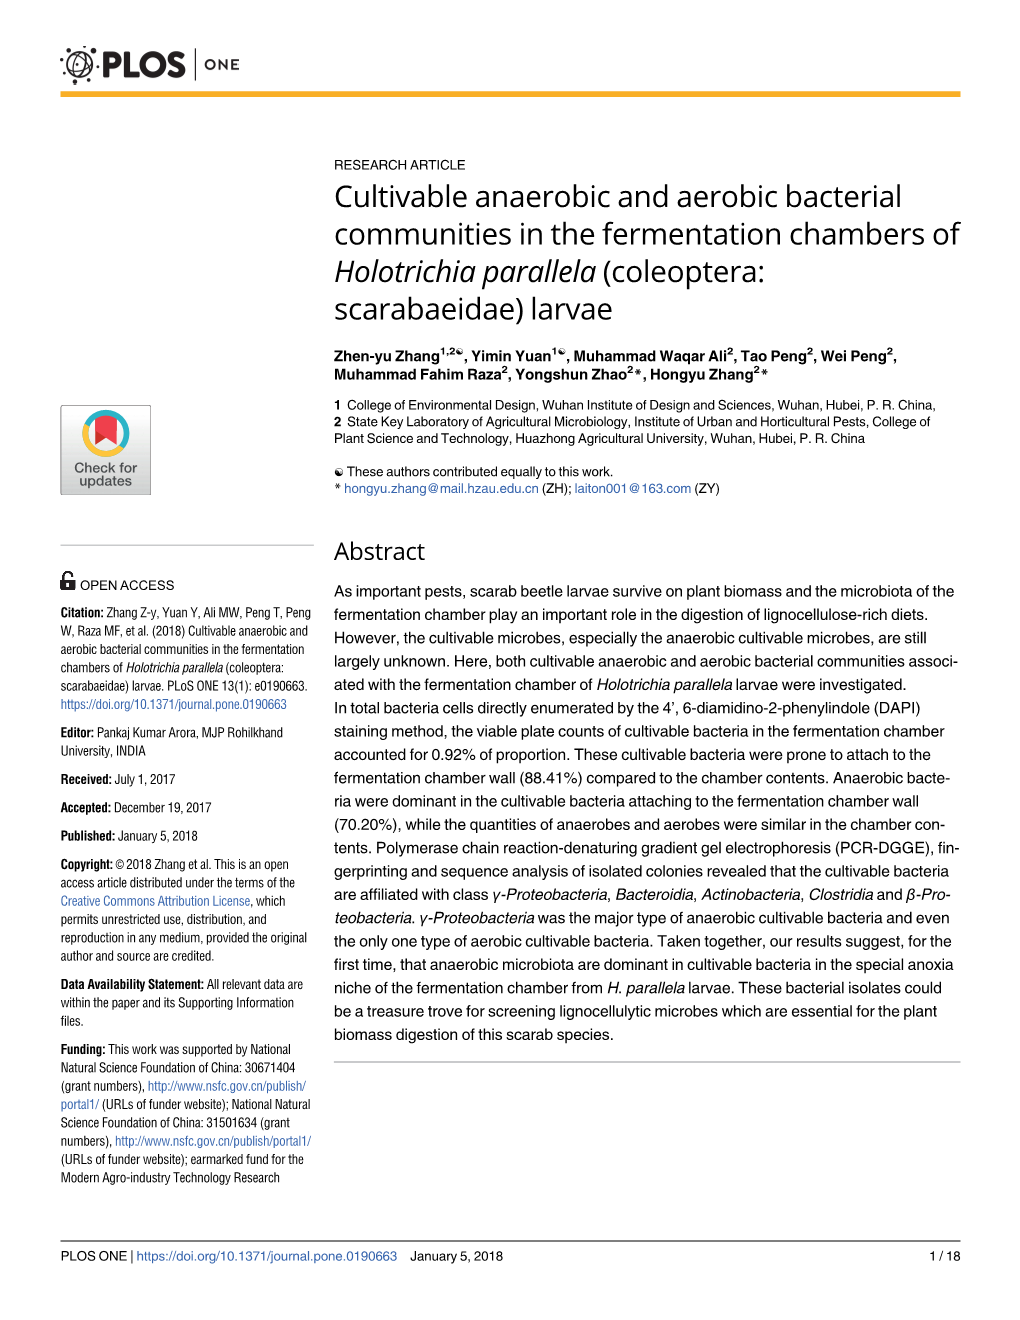 Cultivable Anaerobic and Aerobic Bacterial Communities in the Fermentation Chambers of Holotrichia Parallela (Coleoptera: Scarabaeidae) Larvae